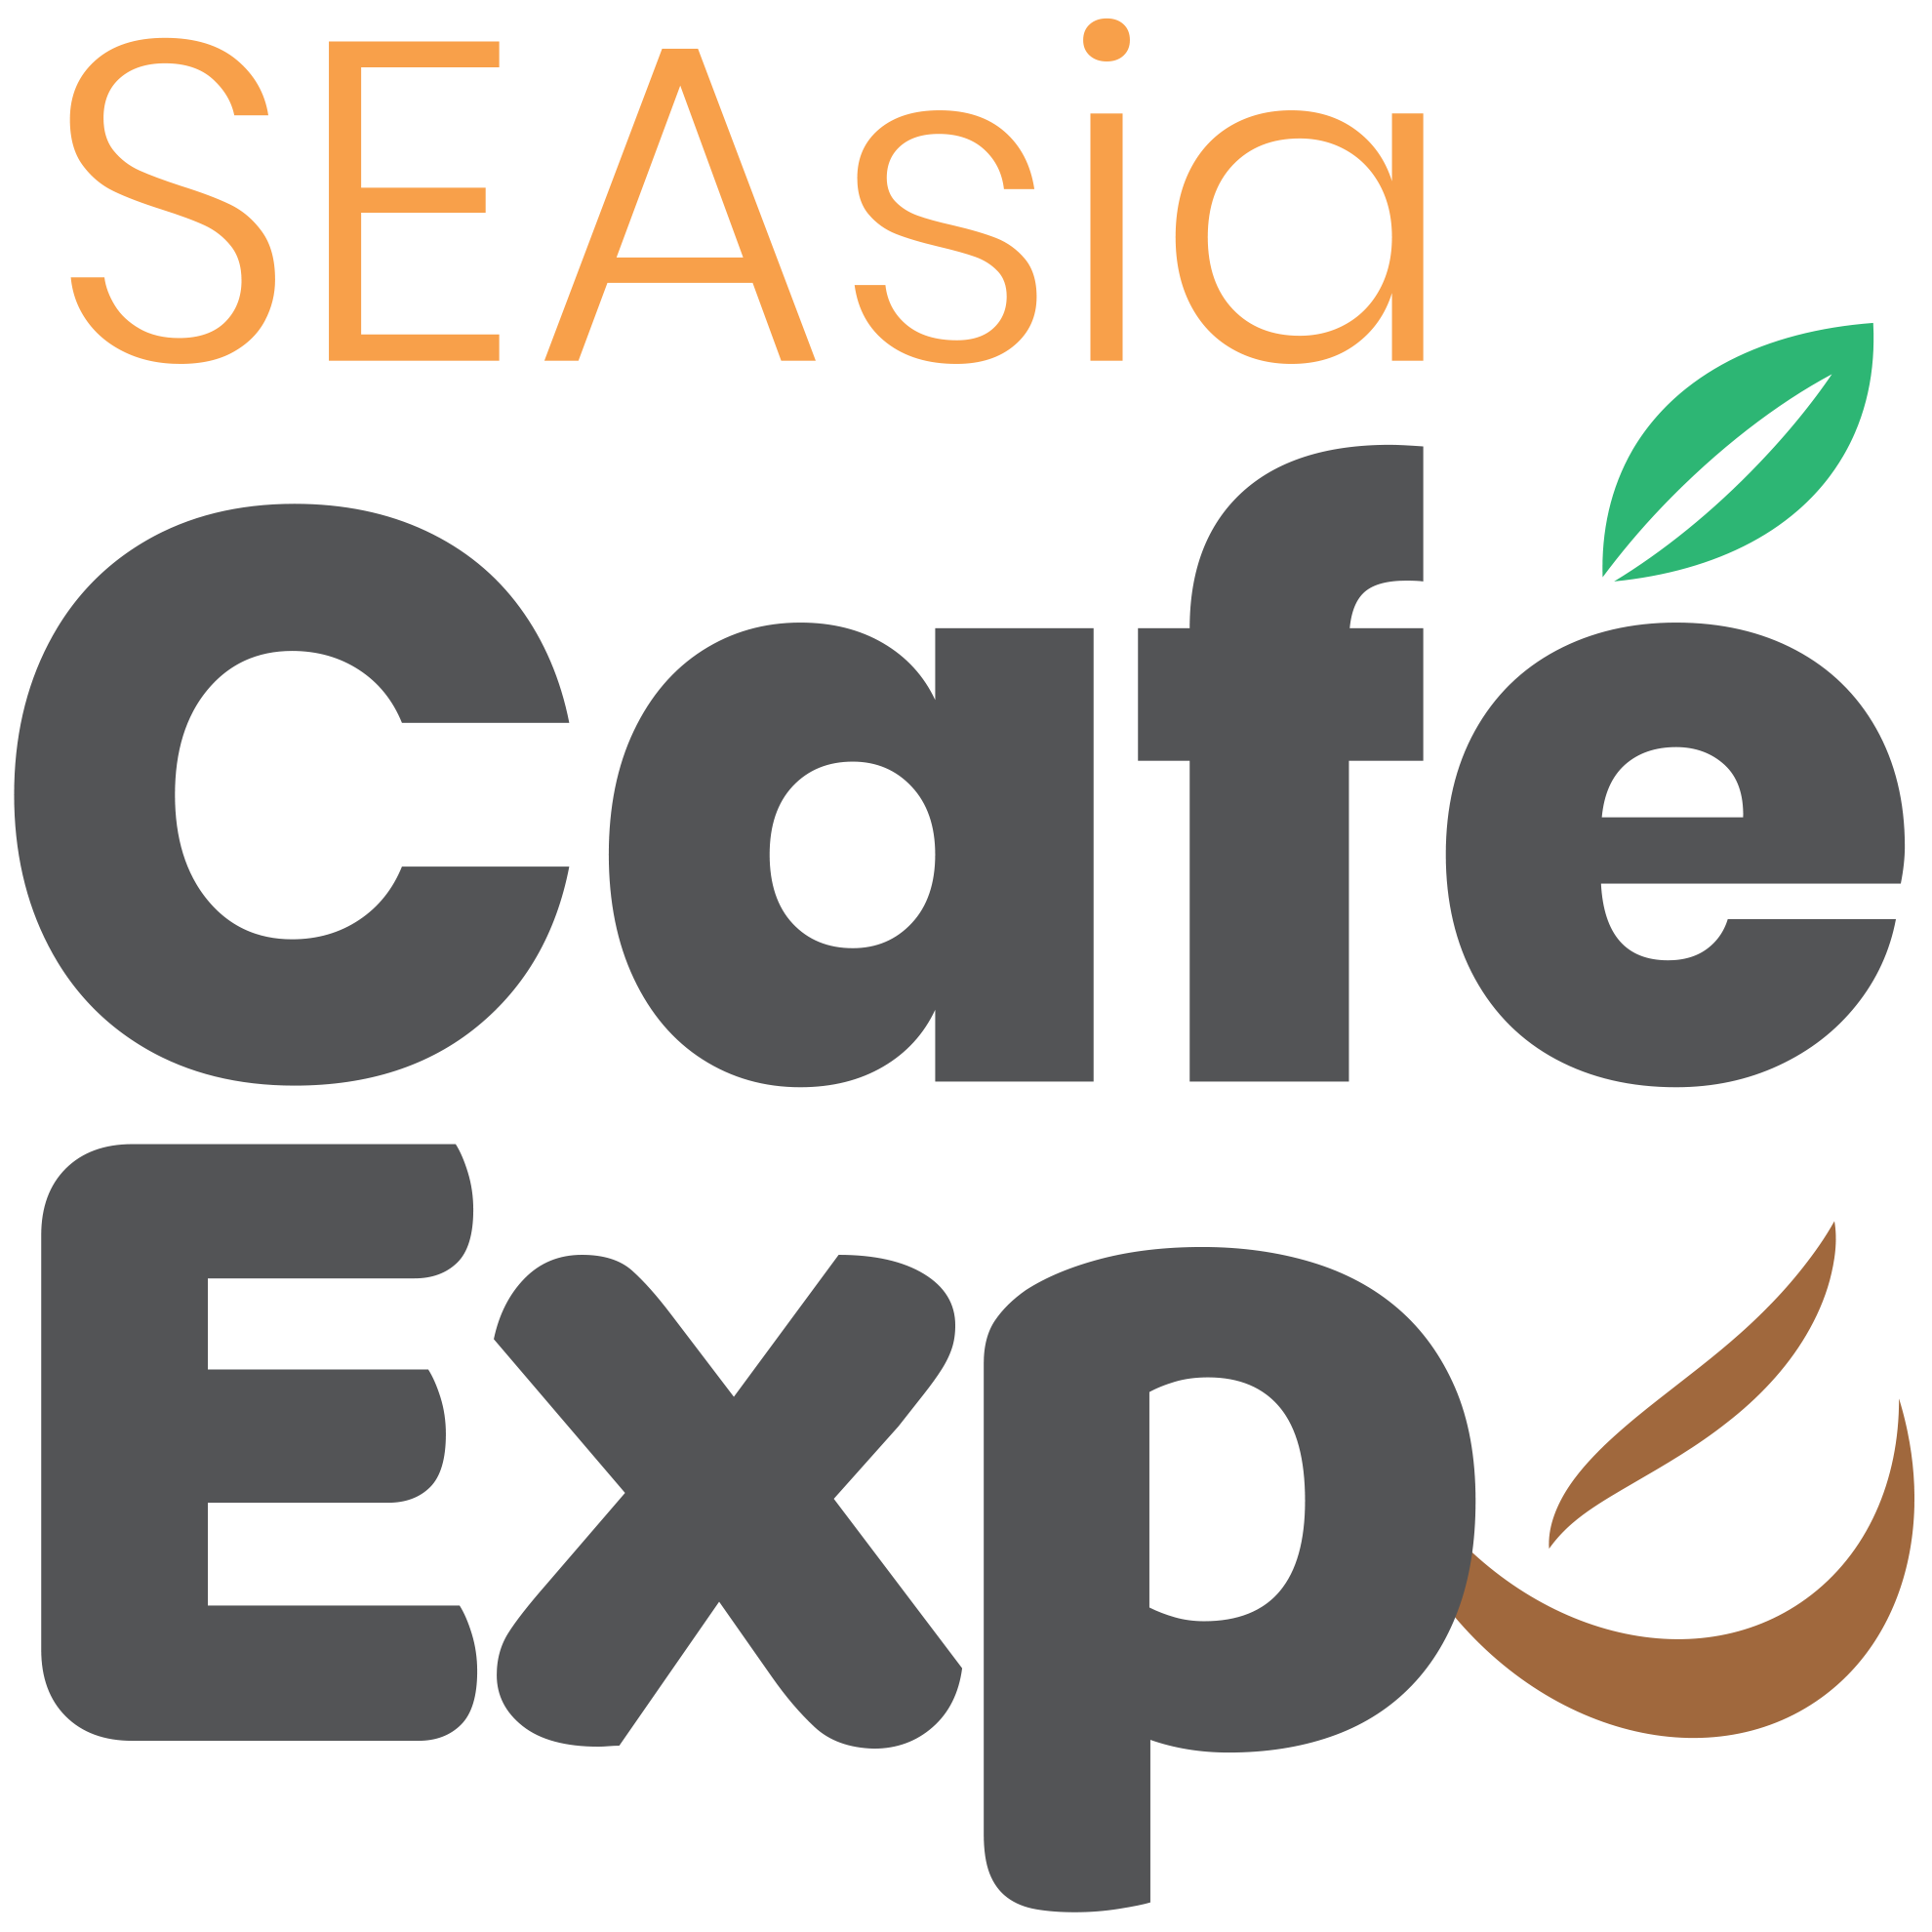 A MULTI-SENSORY EVENT EXPERIENCE AT EQUIP&DINE ASIA AND SEASIA CAFÉ EXPO 2019!